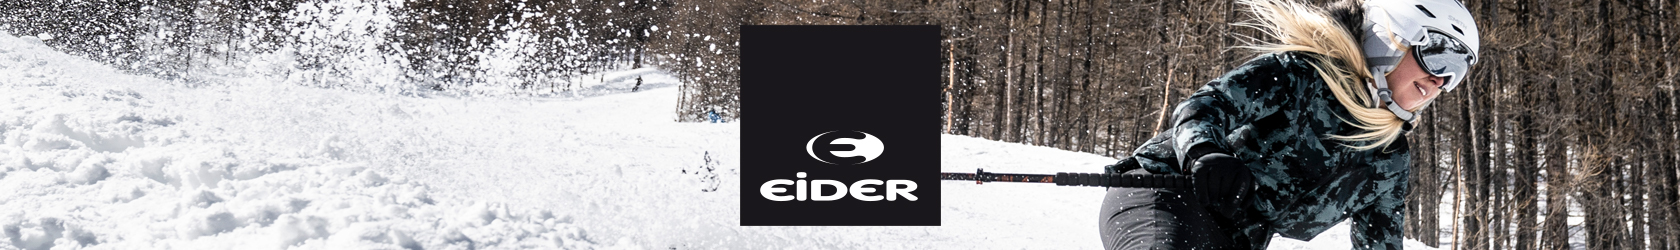 A woman, wearing Eider gear, is skiing down a slope.